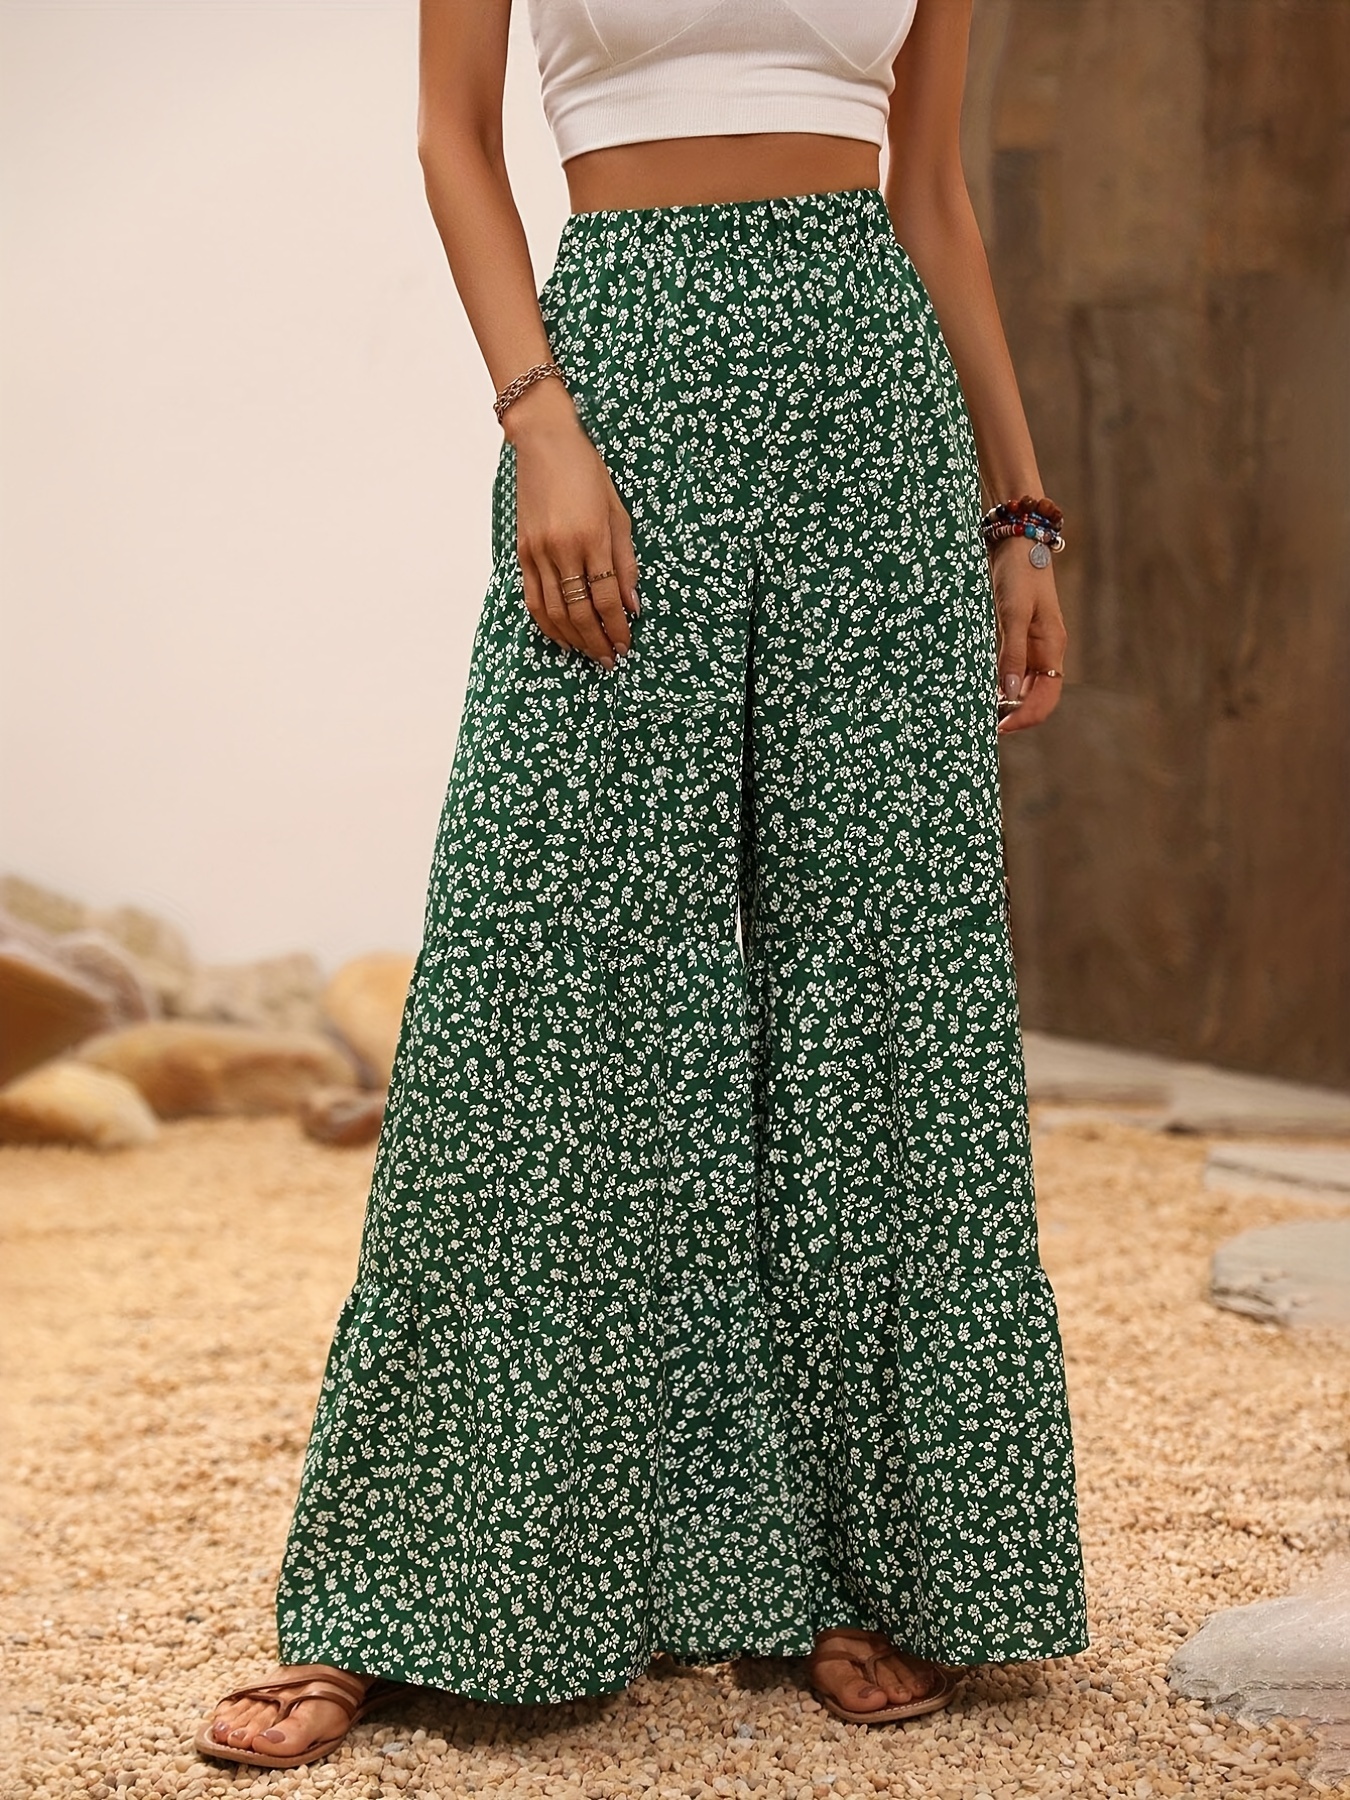 YWDJ Palazzo Pants for Women Petite Vintage High Waist High Rise Floral  Wide Leg Printed Long Pant Pants Vintage Stylish Waist Tie Wide-Leg Pants  for